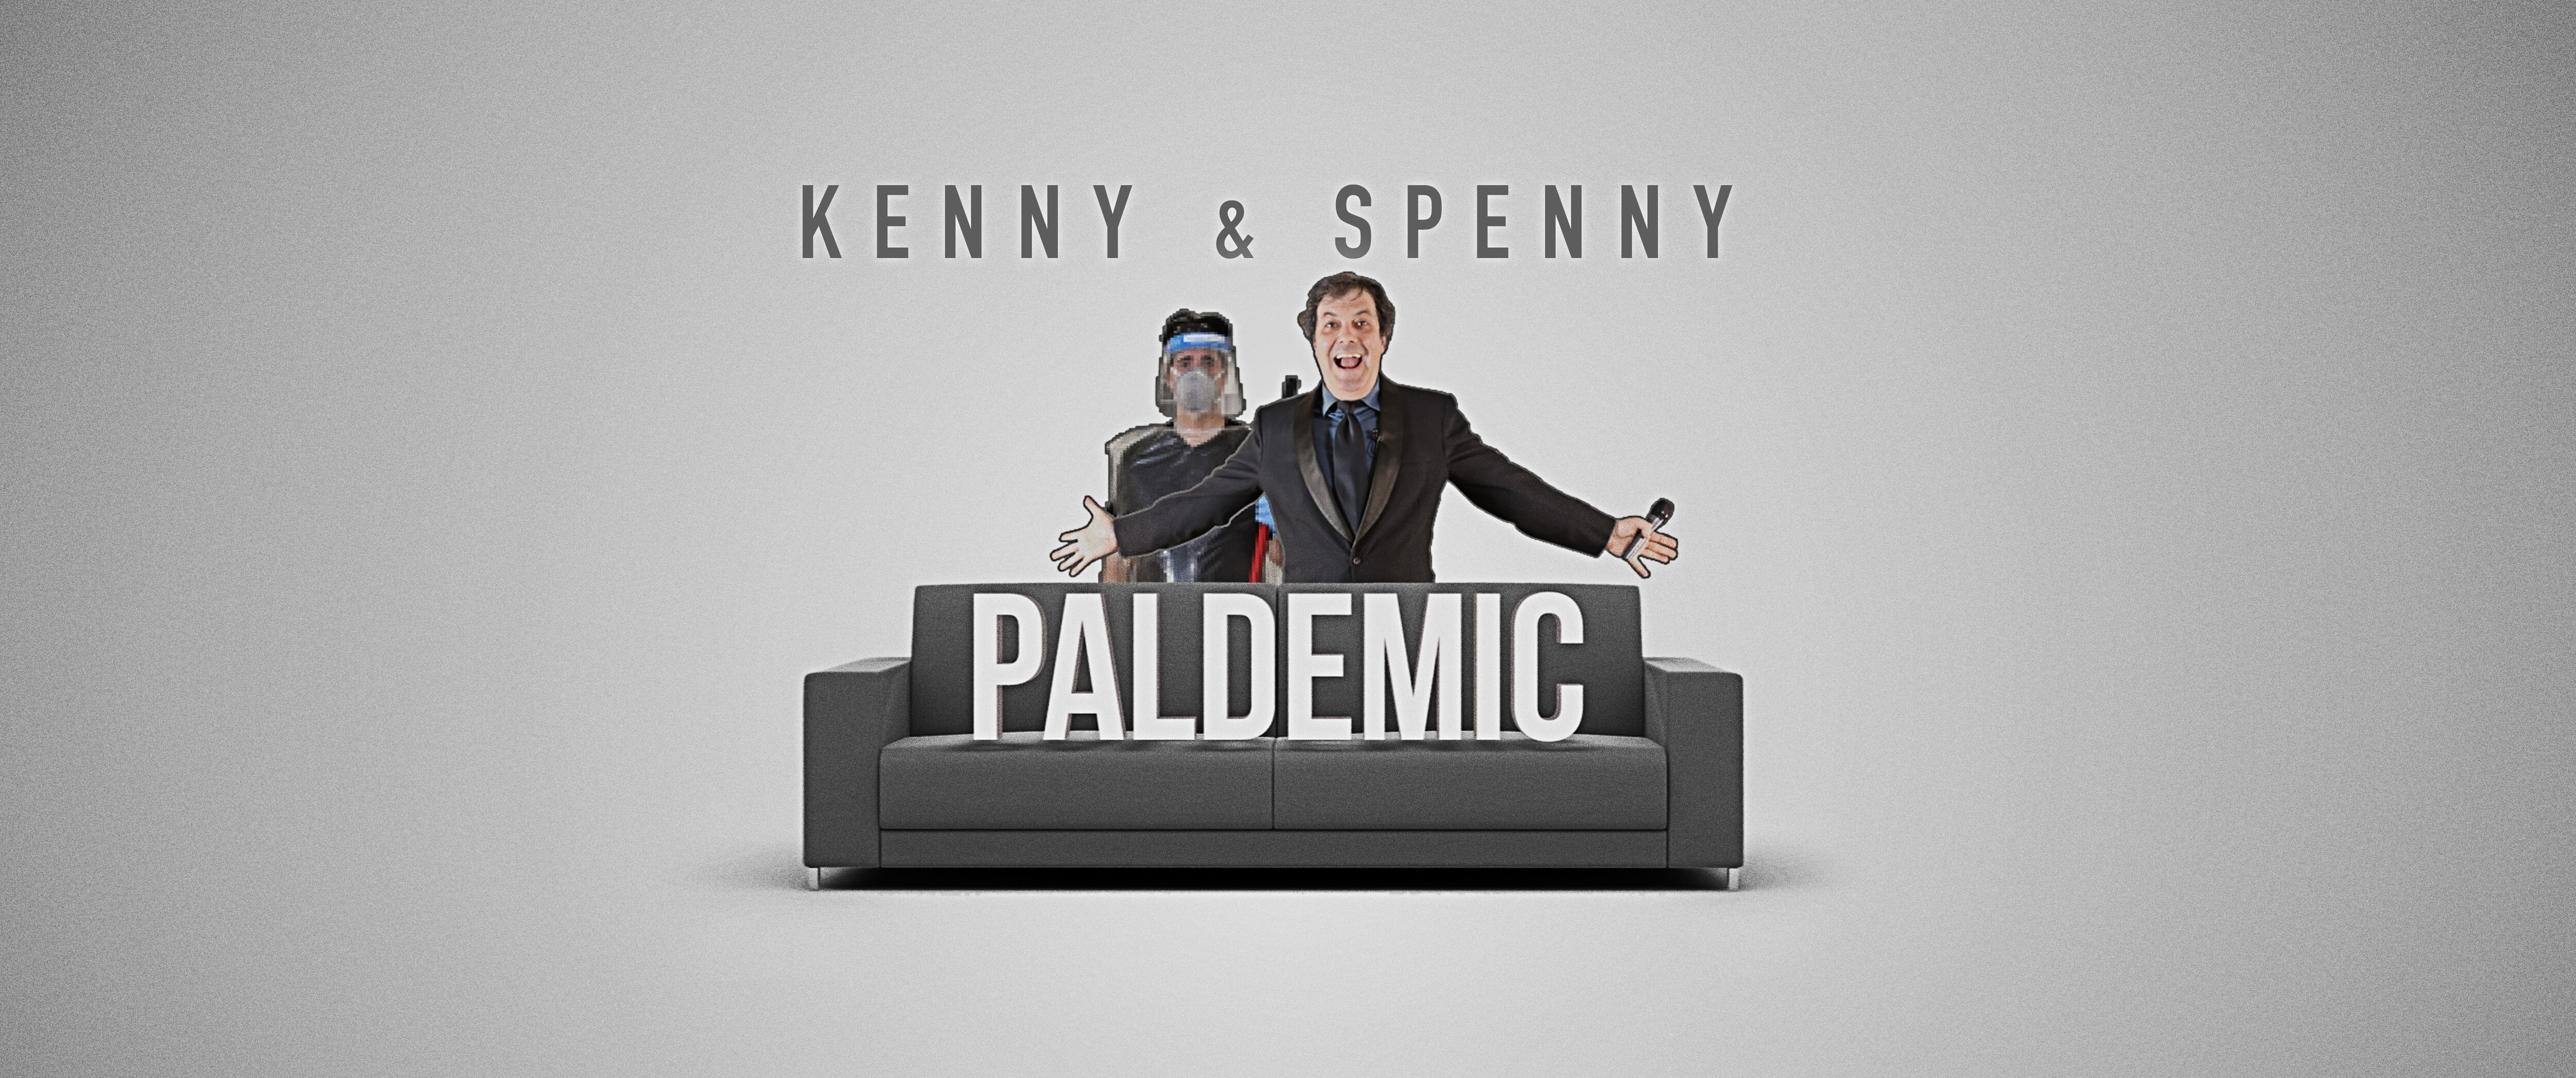 Kenny and spenny paldemic